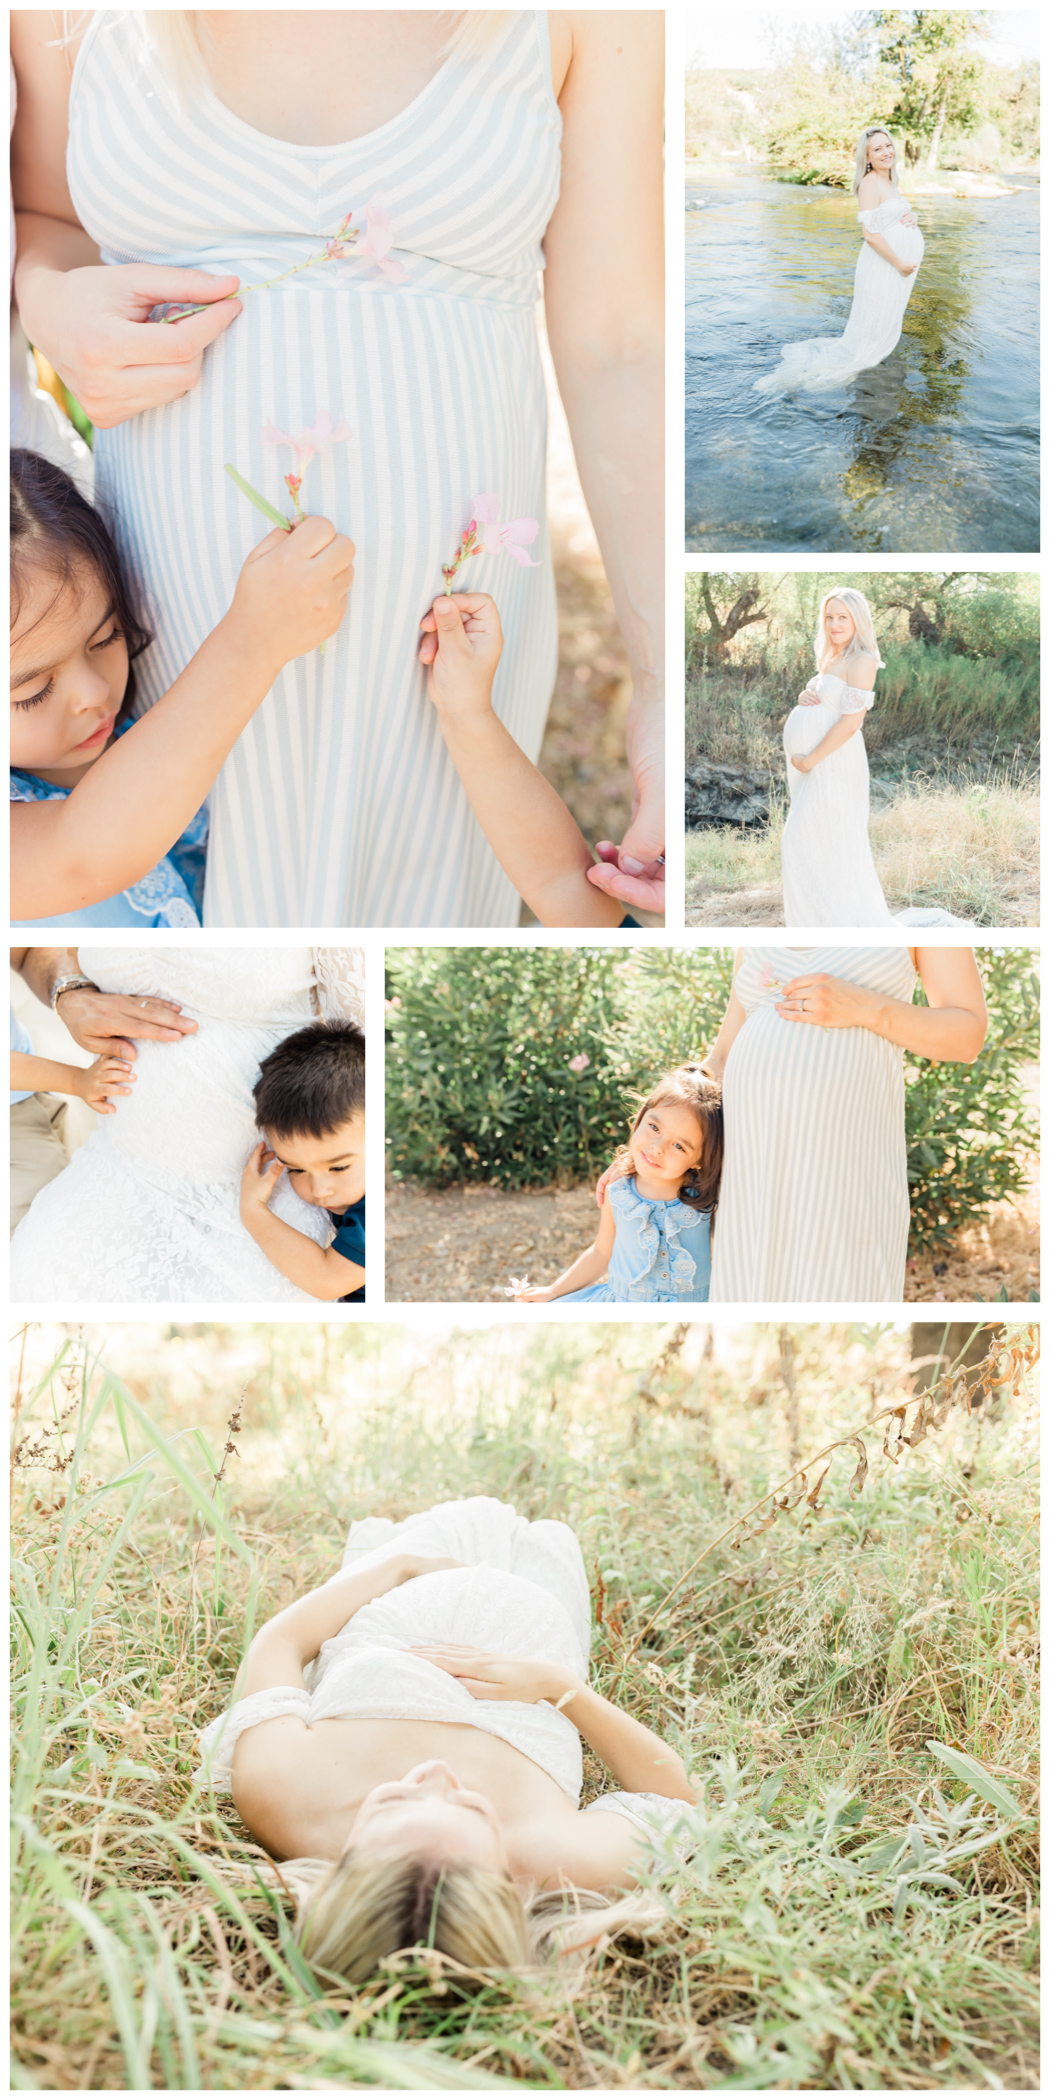 collage of maternity photos. Mother is wearing white and a blue and white striped dress.